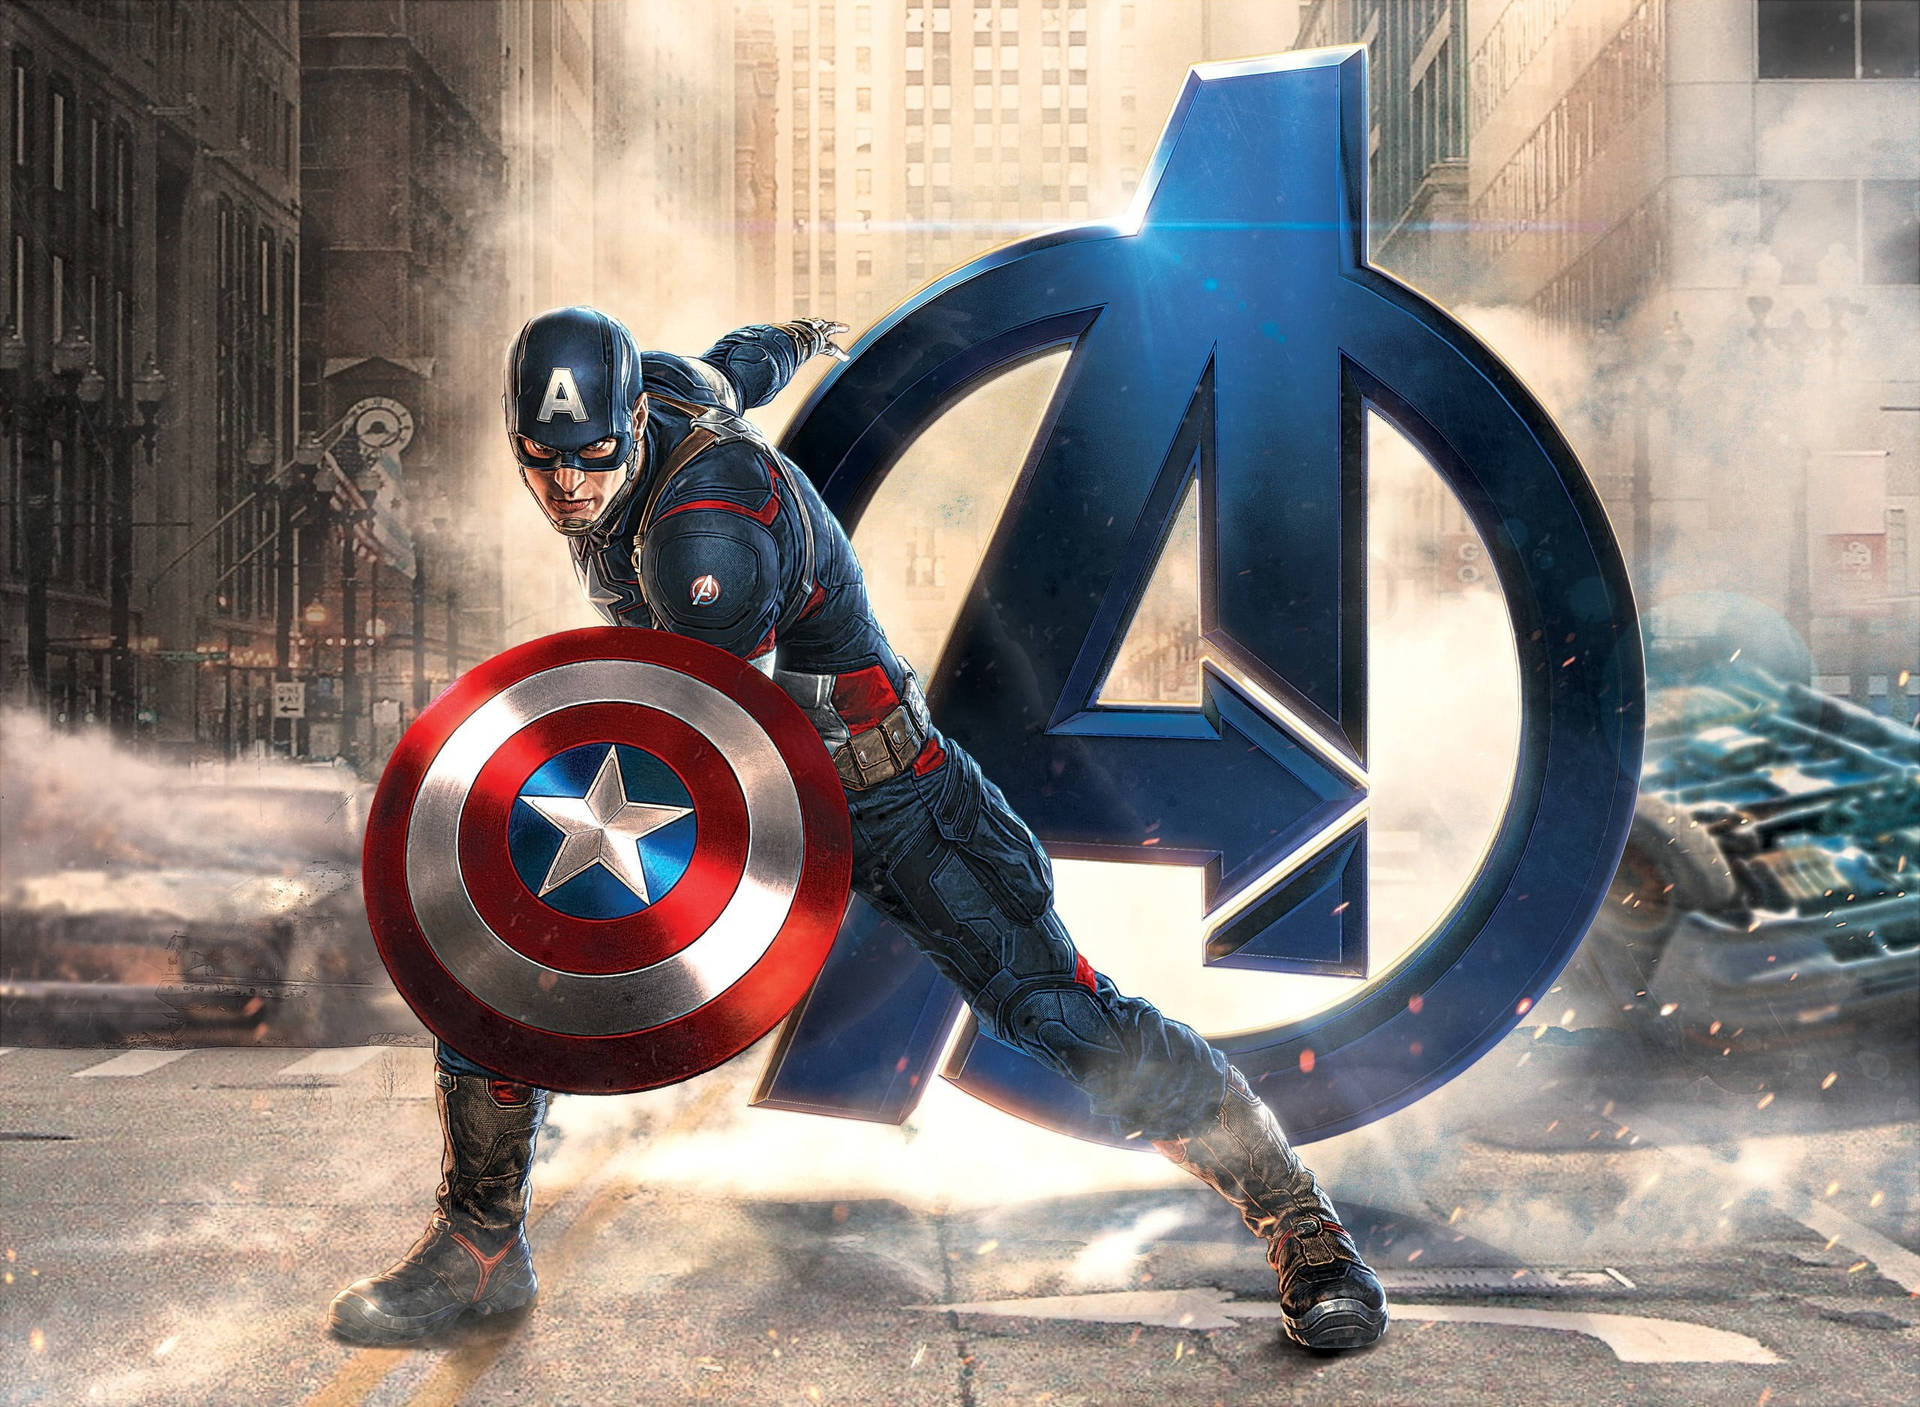 The heroic Captain America is ready for battle Wallpaper